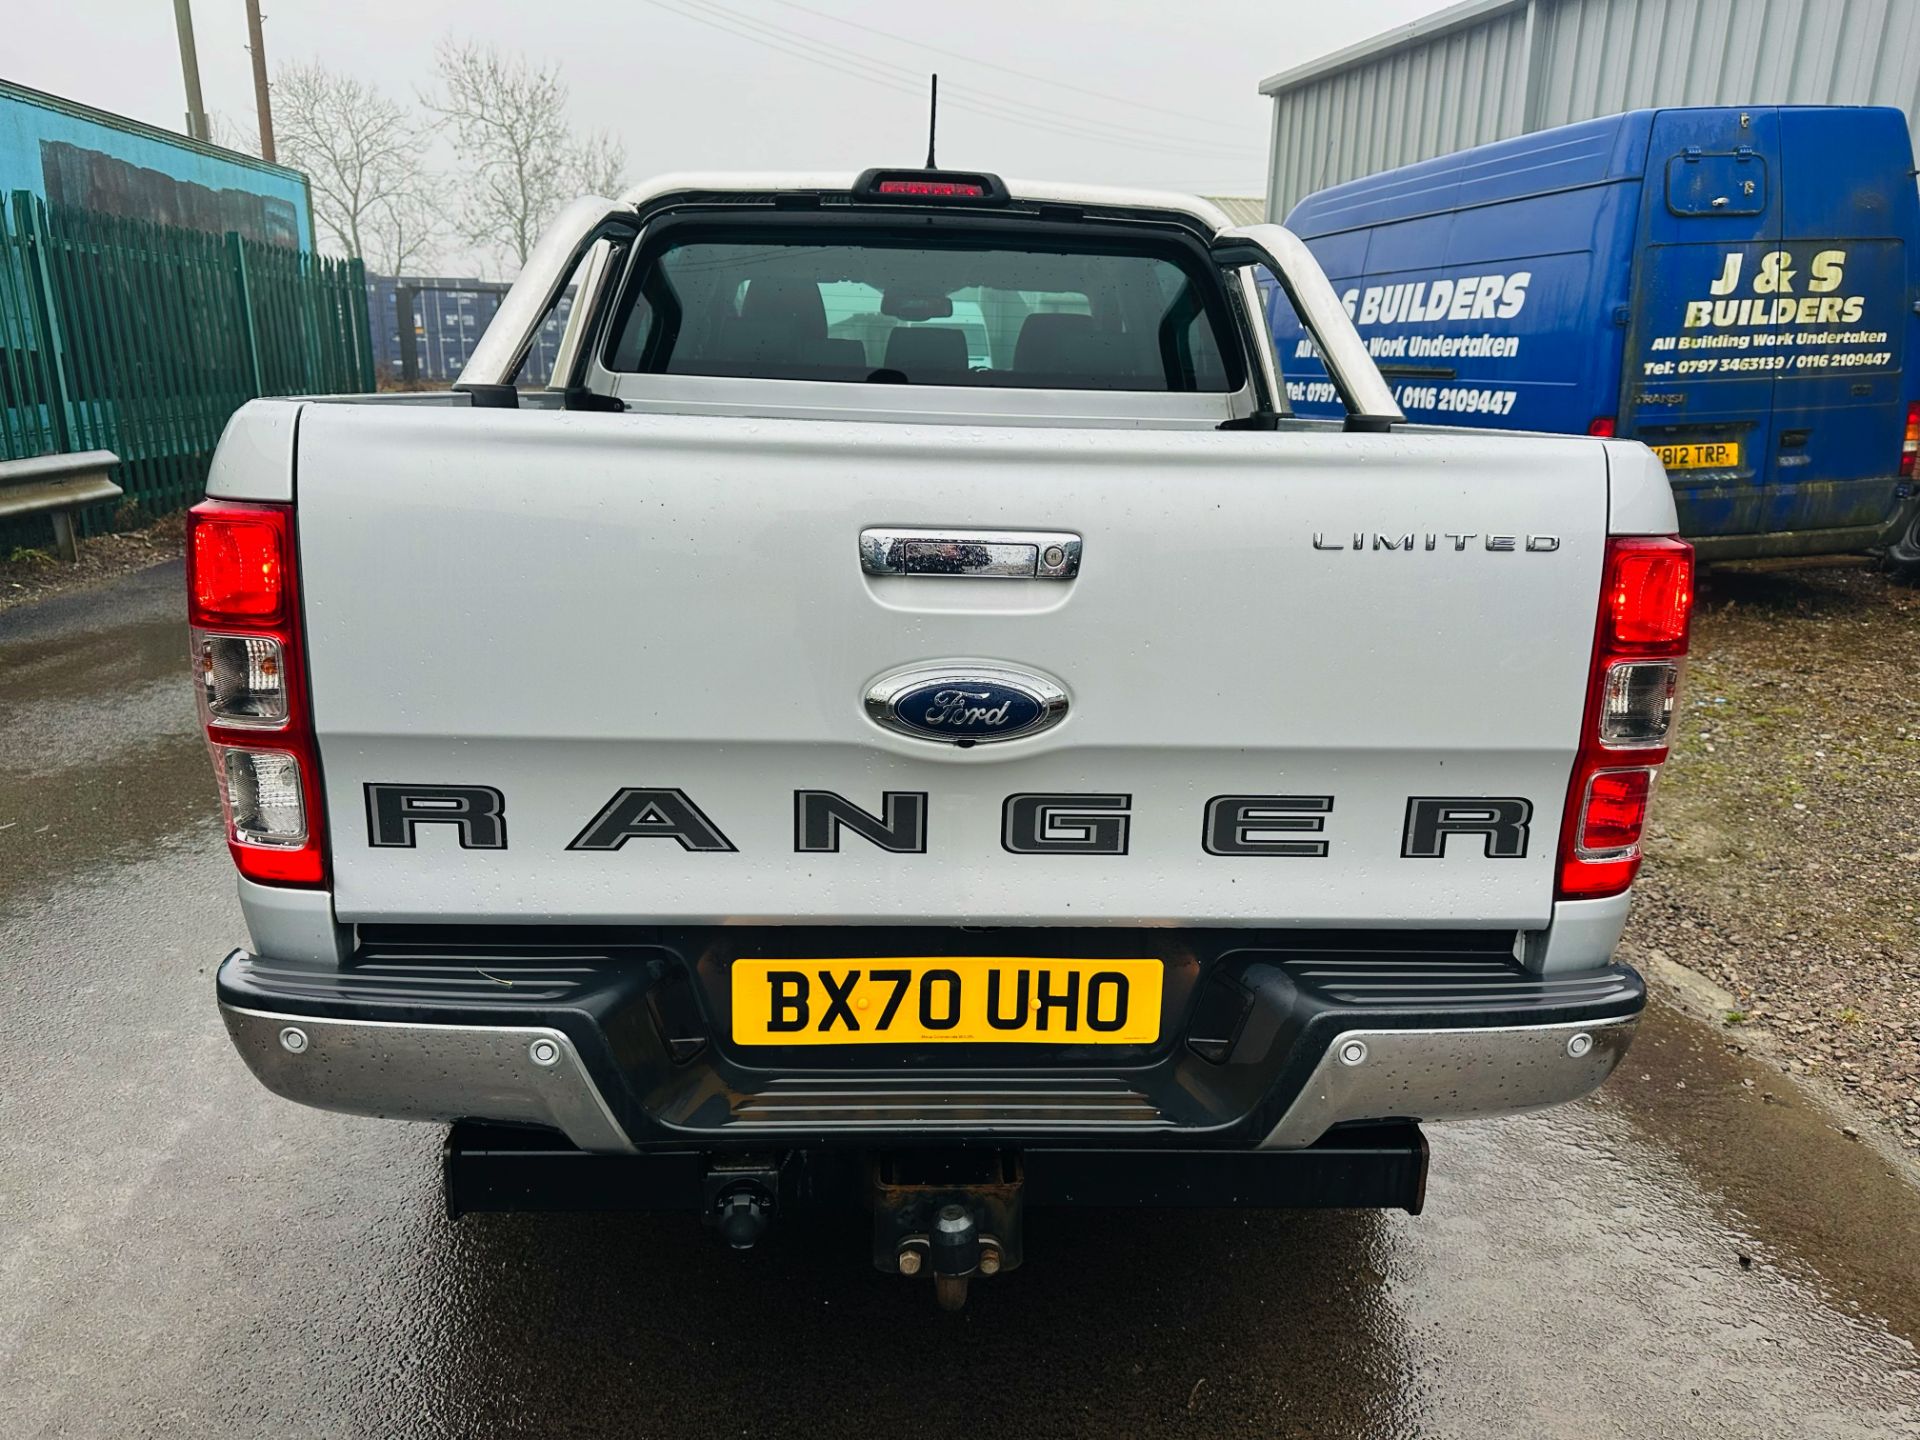 Ford Ranger 2.0 TDCI LIMITED 170BHP Auto SS (2021 Model) Huge Spec -Sat Nav Leather 35k Miles Only - Image 10 of 44